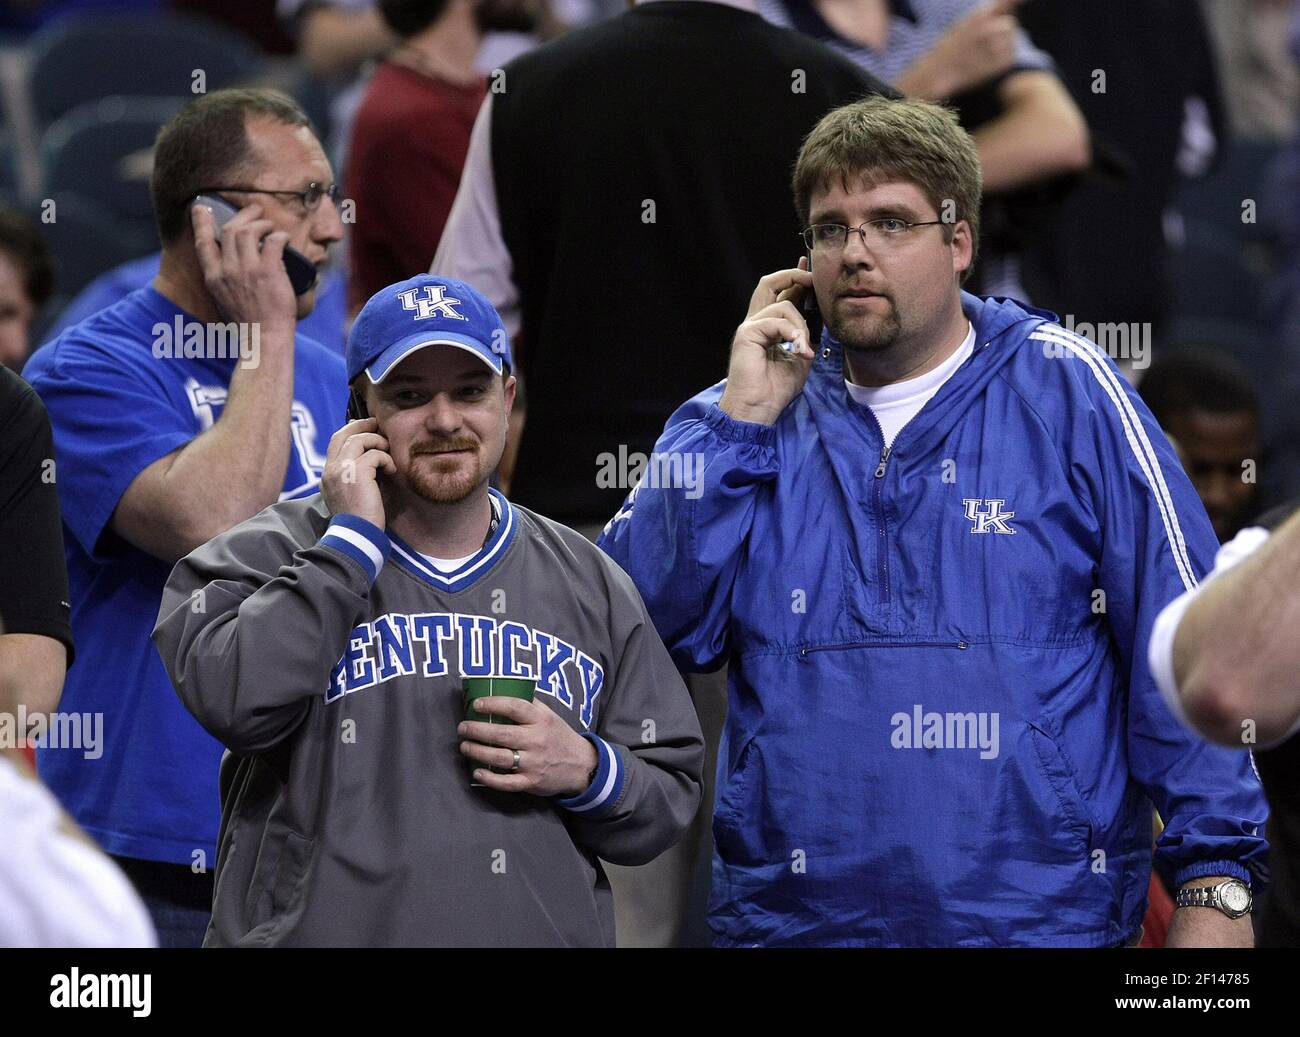 Kentucky fans (from left) D.R. Gray, of Eddieville, Heath Duncan, of Madisonville, and Tom Eveland of Madisonville call home to family after severe weather shook the Georgia Dome and postponed play in the SEC Tournament in Atlanta, Georgia, Friday March 14, 2008. (Photo by Mark Cornelison/Lexington Herald-Leader/MCT/Sipa USA) Stock Photo